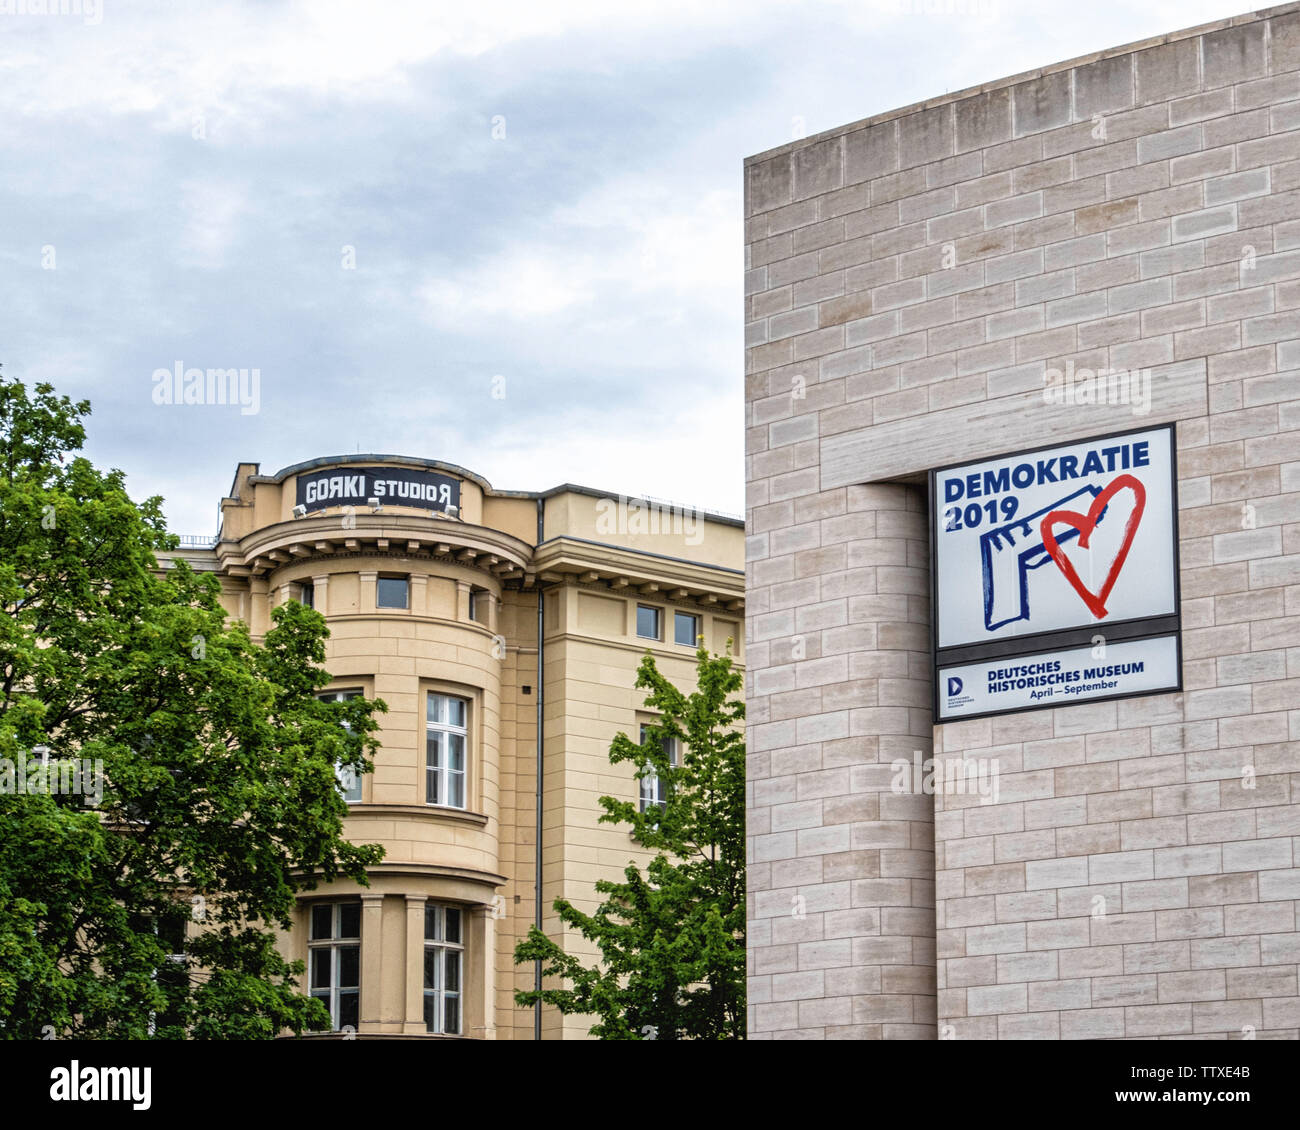 German Historical Museum & Gorki Studio R building In Mitte-Berlin. Sign for Democracy 2019 Exhibition on museum facade Stock Photo